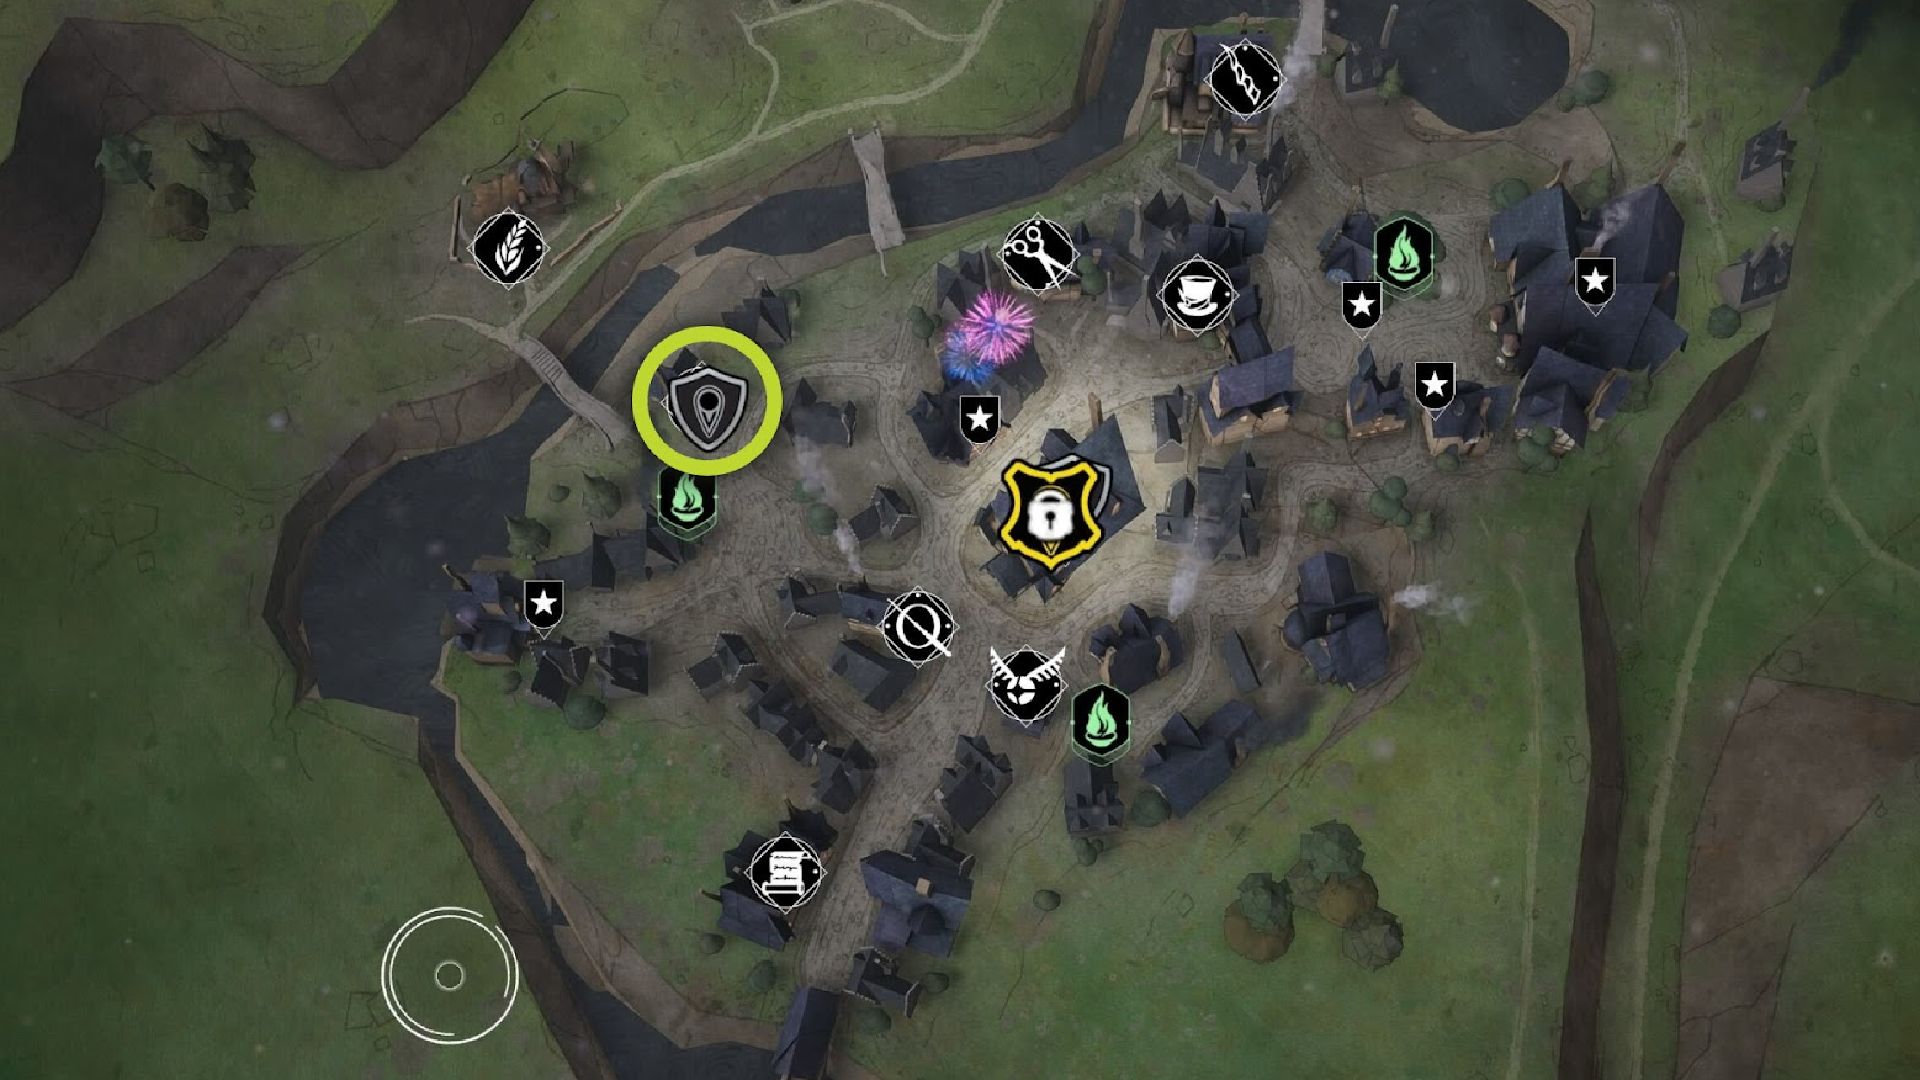 Hogwarts Legacy J. Pippins Potions: The map image can be seen